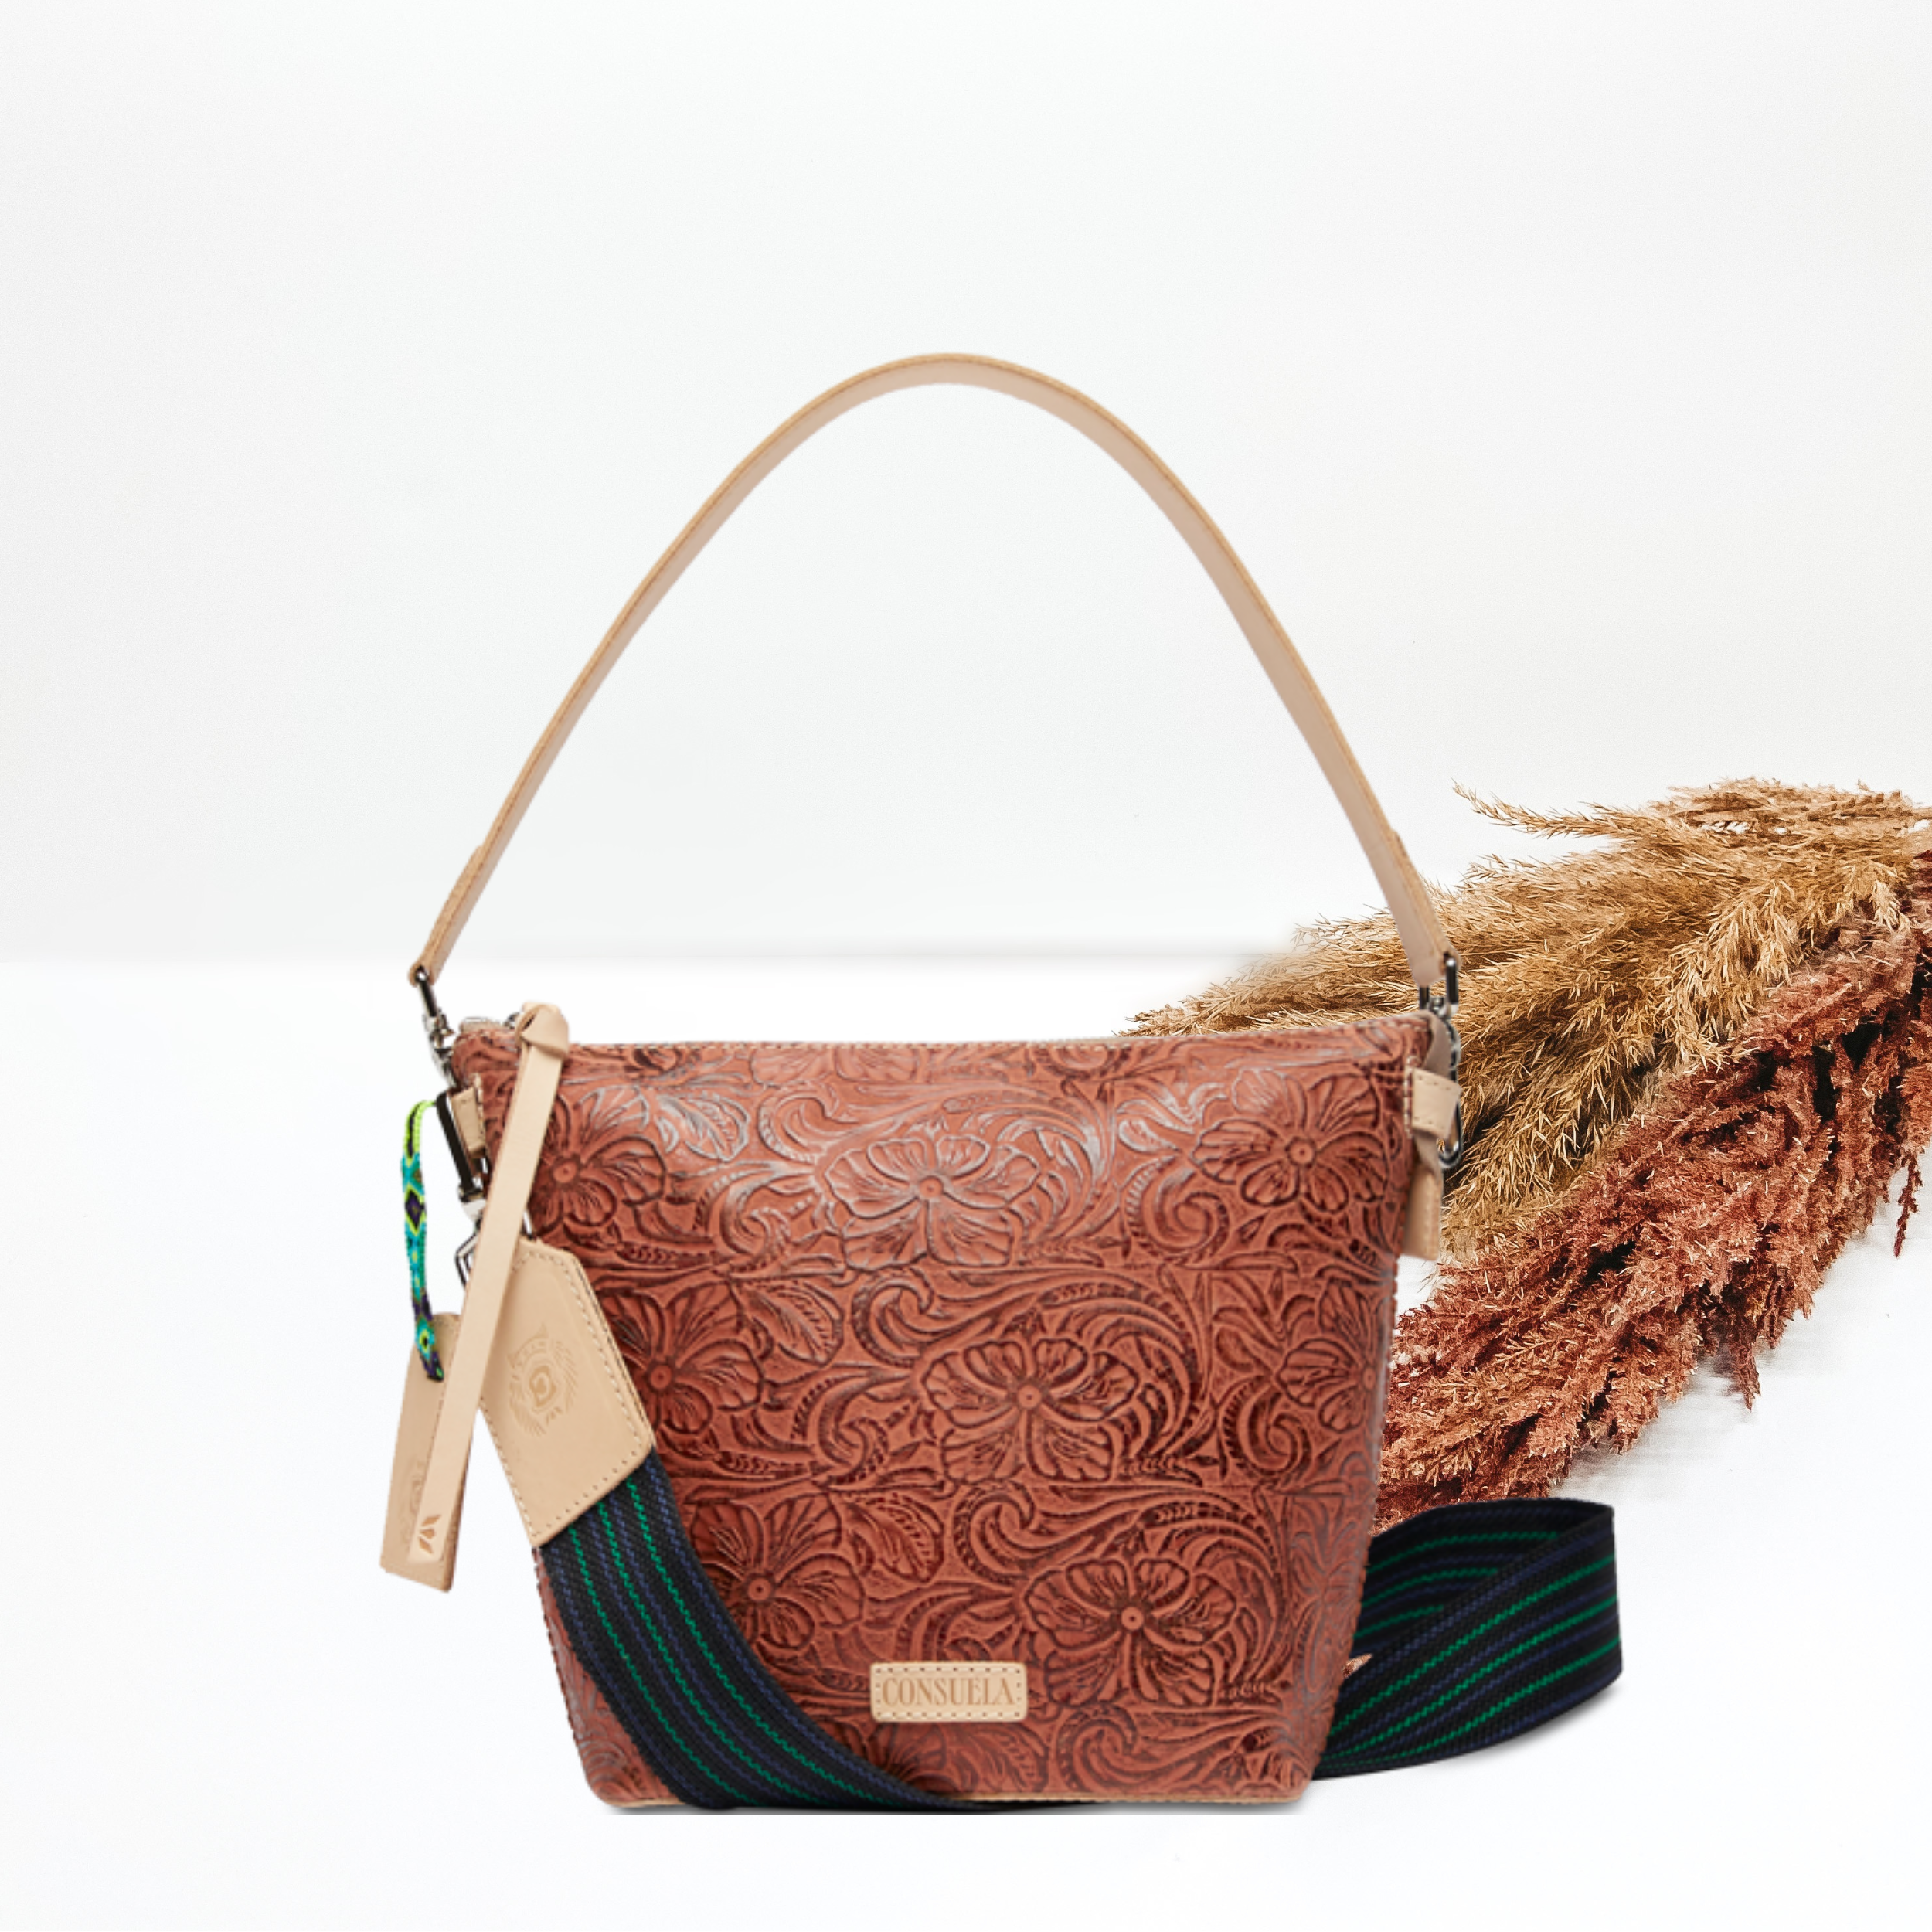 A wedge tooled bag sits in the middle of the picture in a brown tooled pattern. Background is solid white with pompas grass to the right of the purse.  